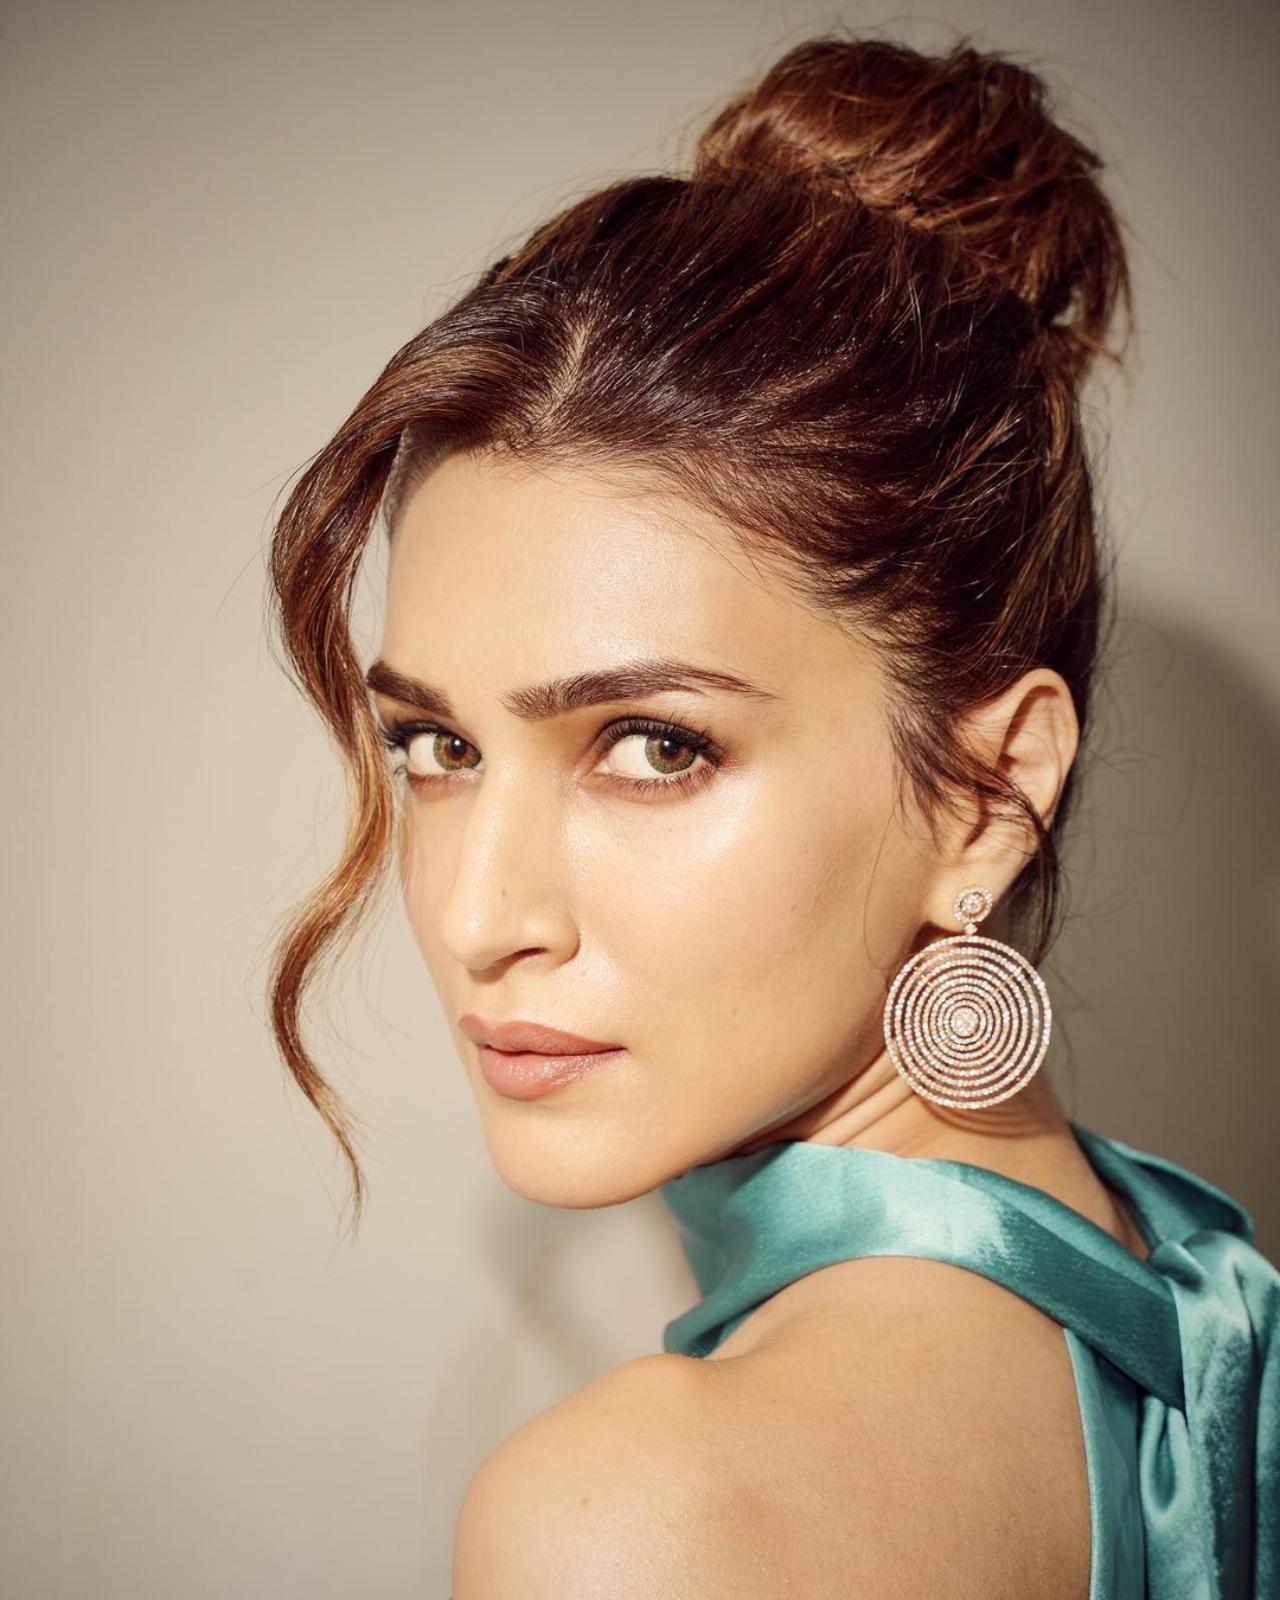 Kriti completed her look with statement silver earrings, a silver bracelet, finger rings and silver sequined stilettos. She tied up her hair in a messy bun and let a few strands of hair frame her face